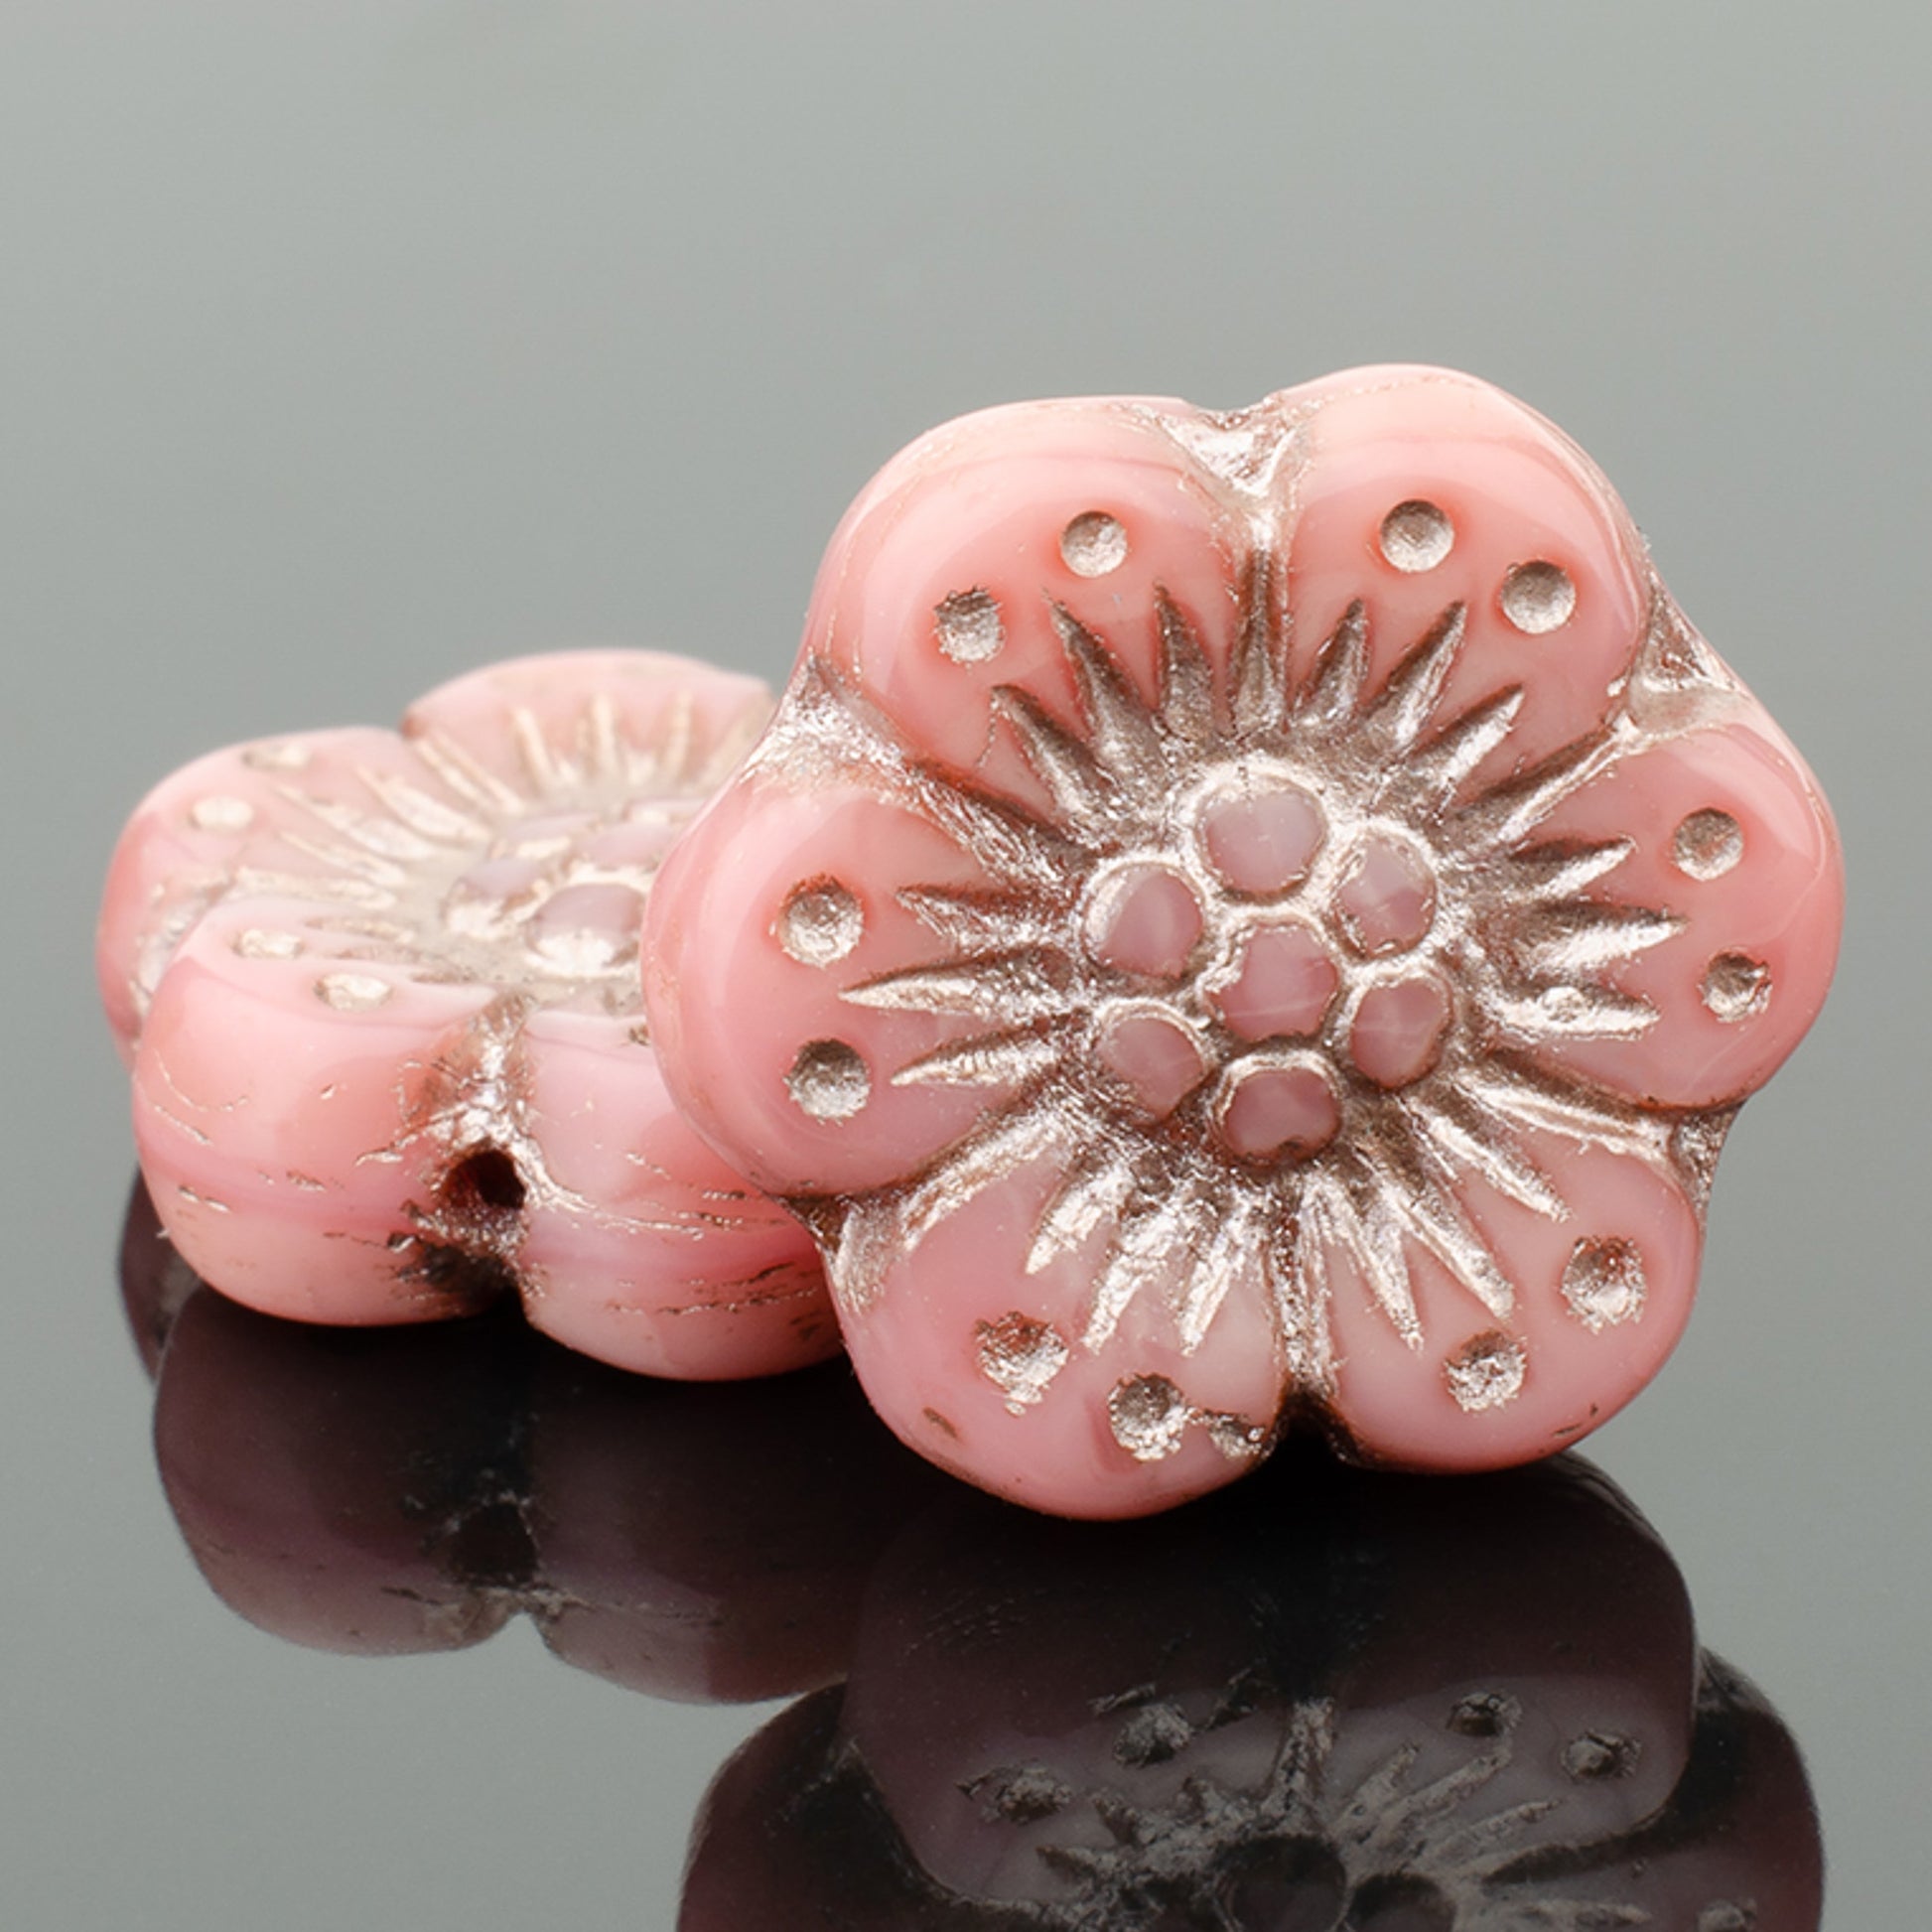 14mm Pink with Platinum Wash Wildflower Glass Bead - 6 pcs.-The Bead Gallery Honolulu